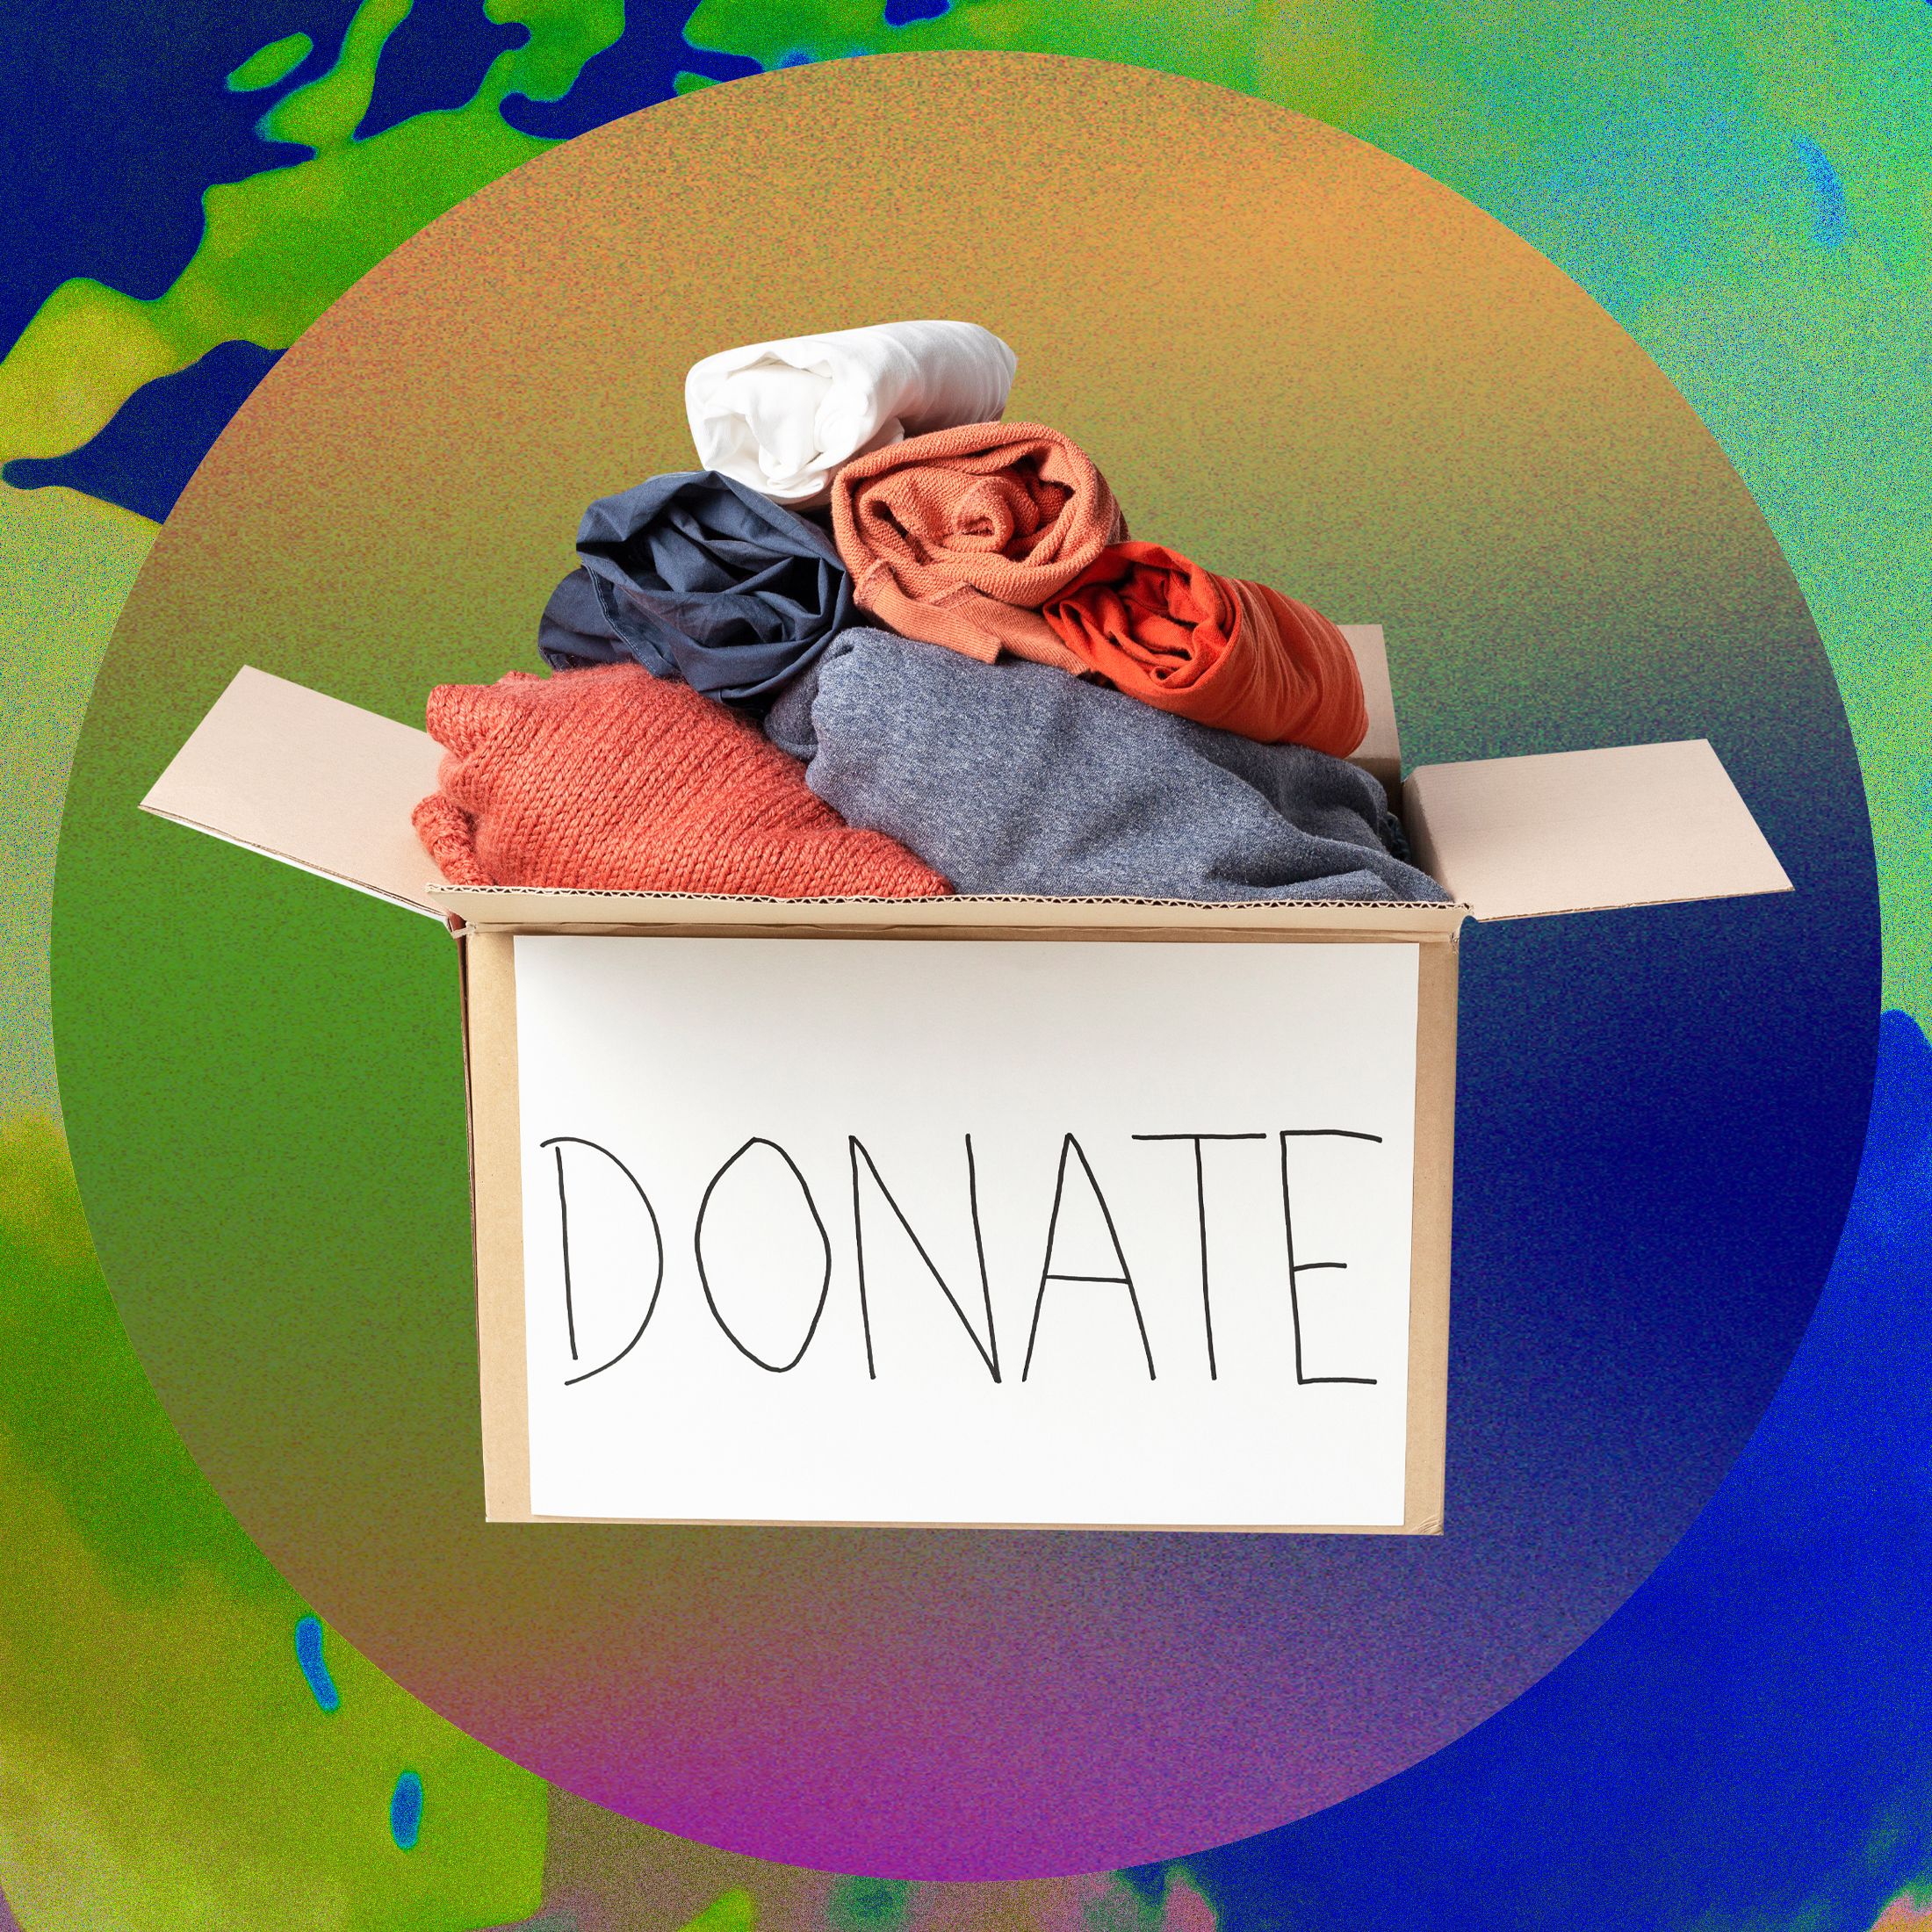 donating clothes